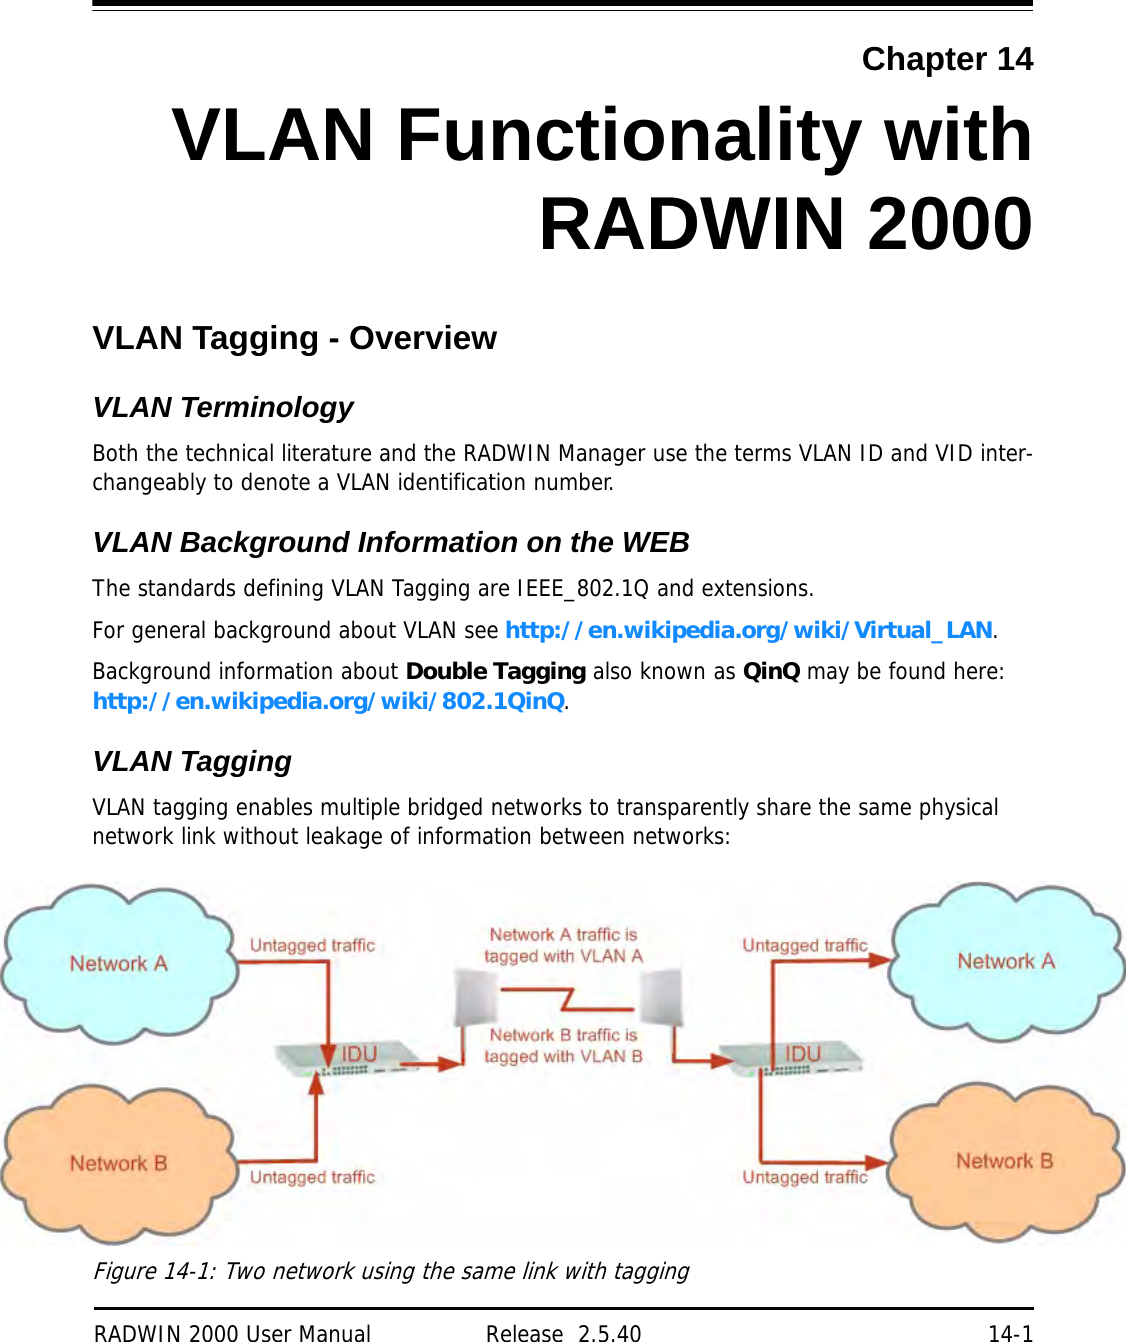 RADWIN 2000 User Manual Release  2.5.40 14-1Chapter 14VLAN Functionality withRADWIN 2000VLAN Tagging - OverviewVLAN TerminologyBoth the technical literature and the RADWIN Manager use the terms VLAN ID and VID inter-changeably to denote a VLAN identification number.VLAN Background Information on the WEBThe standards defining VLAN Tagging are IEEE_802.1Q and extensions.For general background about VLAN see http://en.wikipedia.org/wiki/Virtual_LAN.Background information about Double Tagging also known as QinQ may be found here: http://en.wikipedia.org/wiki/802.1QinQ.VLAN TaggingVLAN tagging enables multiple bridged networks to transparently share the same physical network link without leakage of information between networks:Figure 14-1: Two network using the same link with tagging